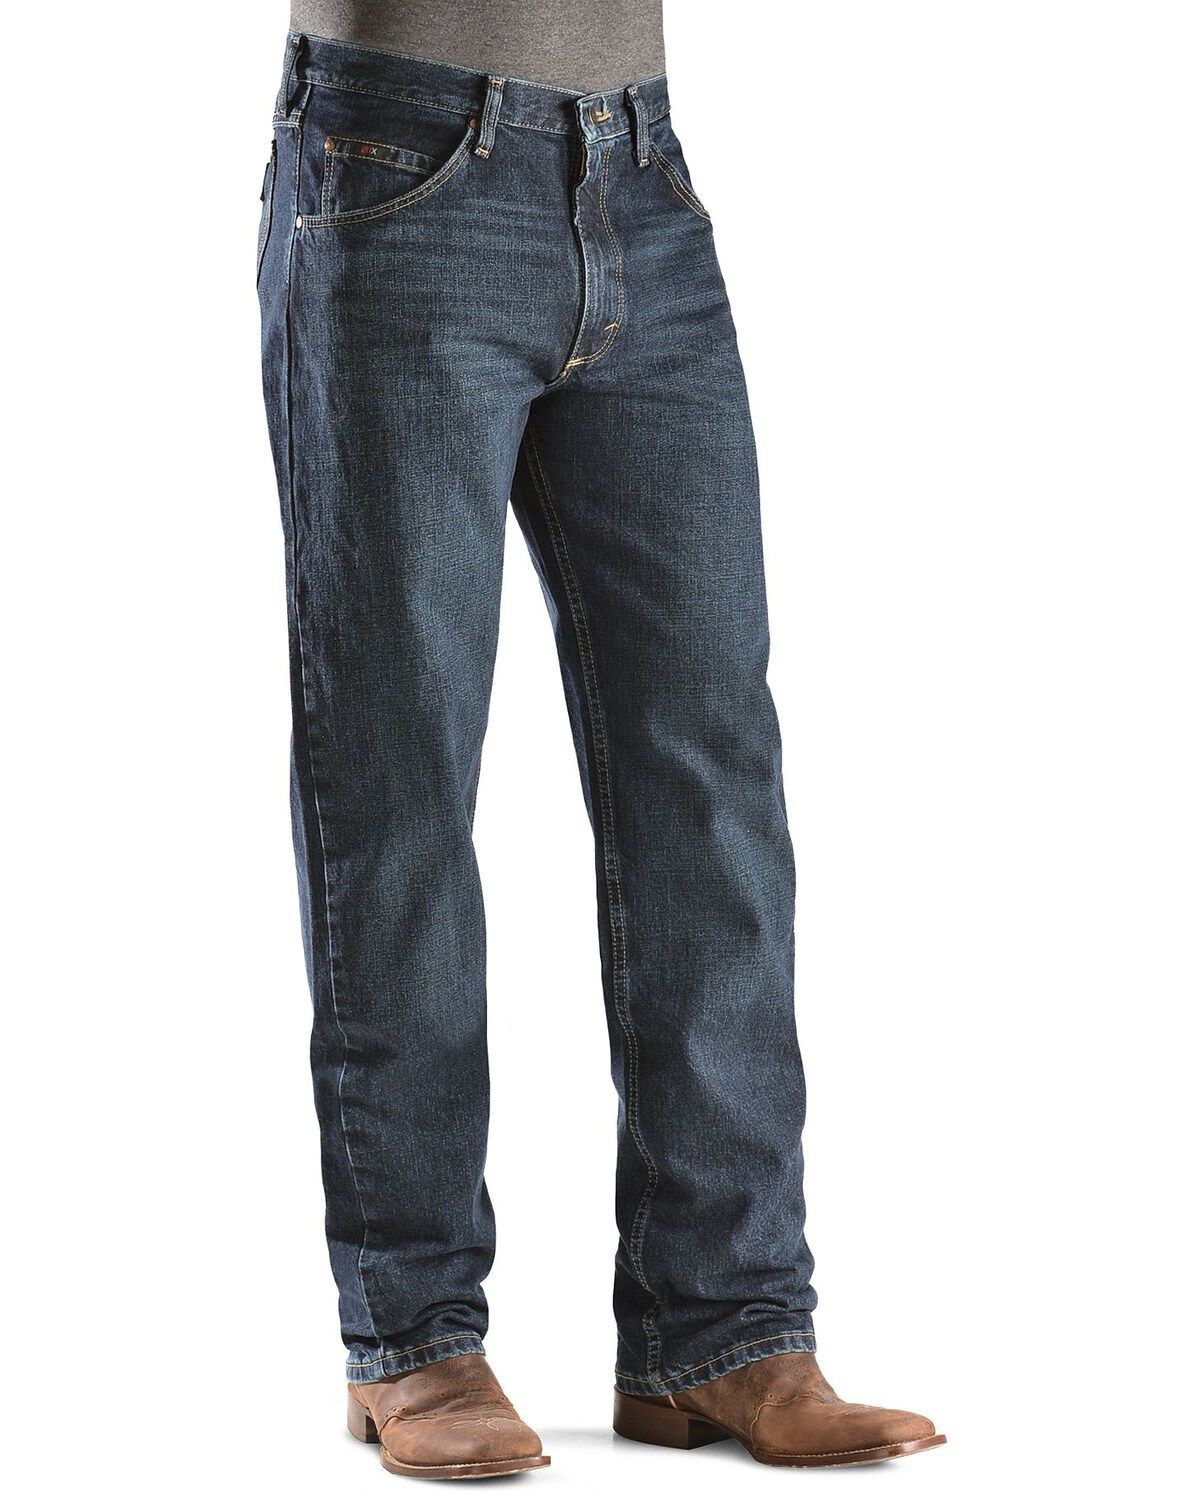 wrangler 01 competition jeans